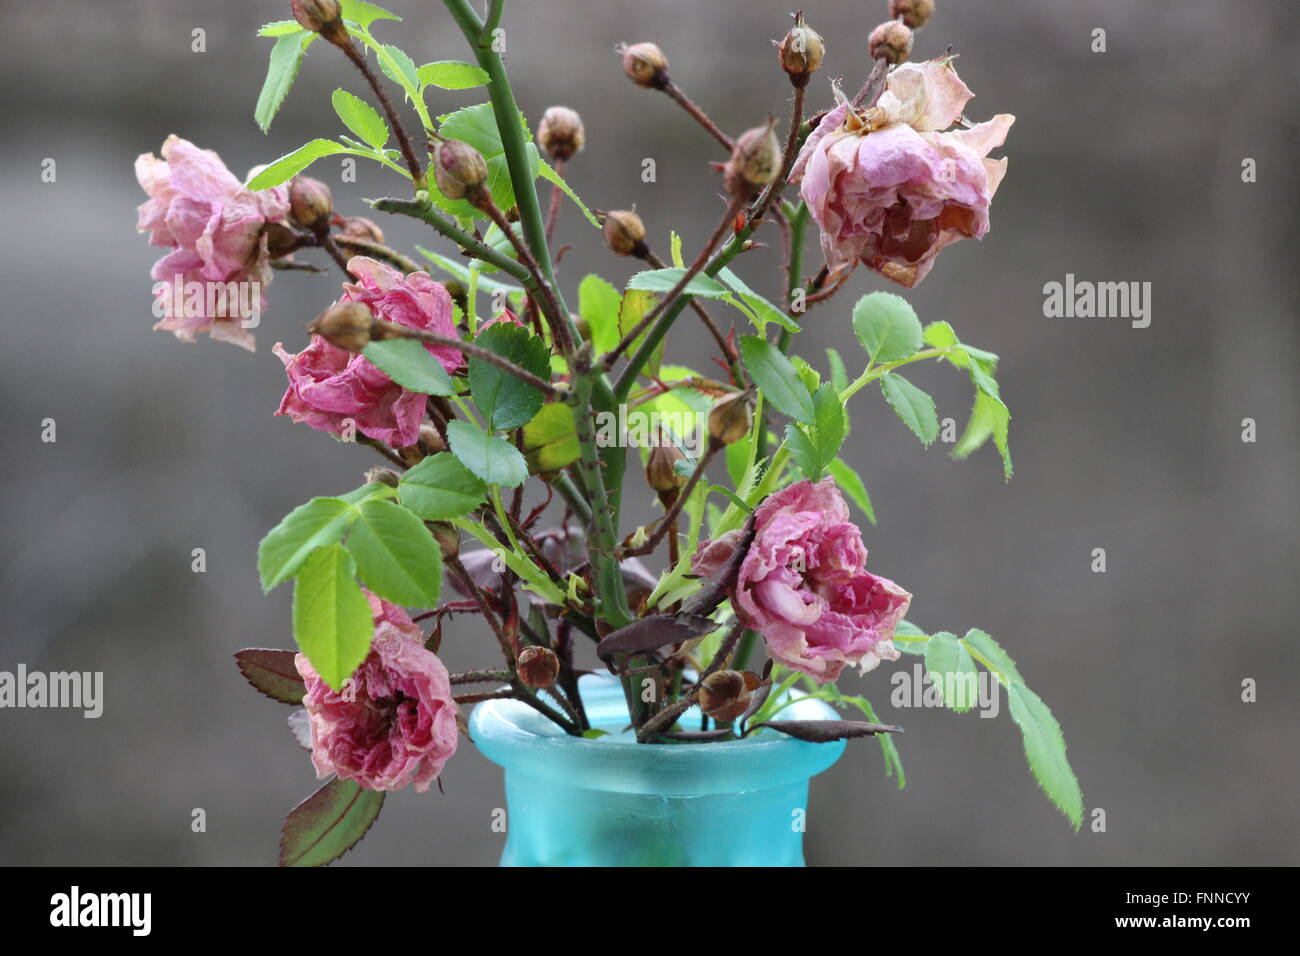 Rose cuttings - dead shriveled flowers with fresh new leaves bursting forth Stock Photo